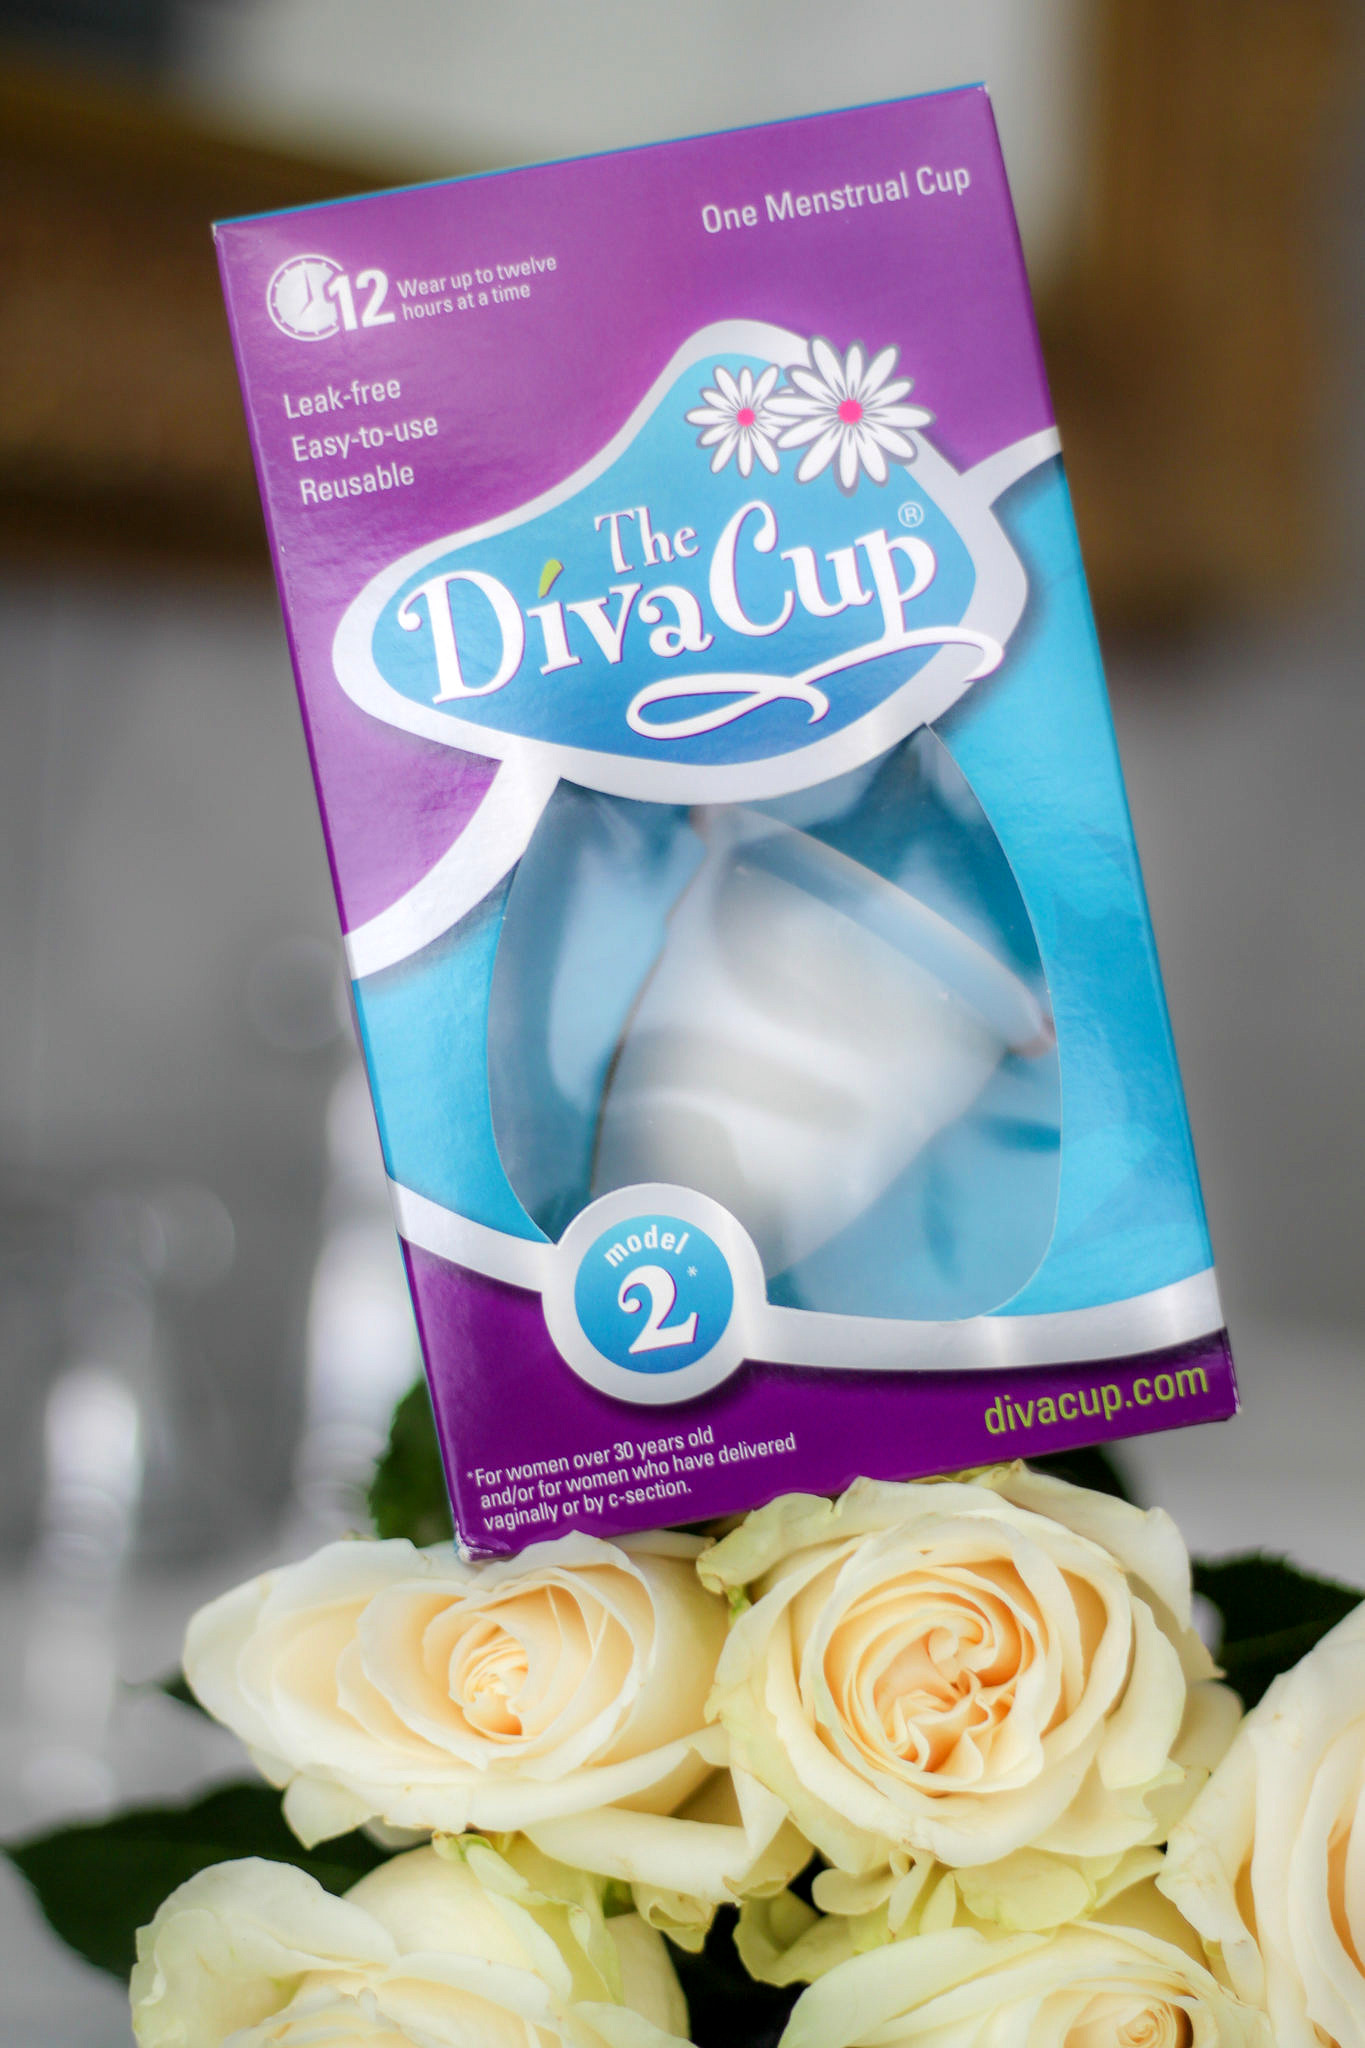 DivaCup: The Benefits of using a Menstrual Cup